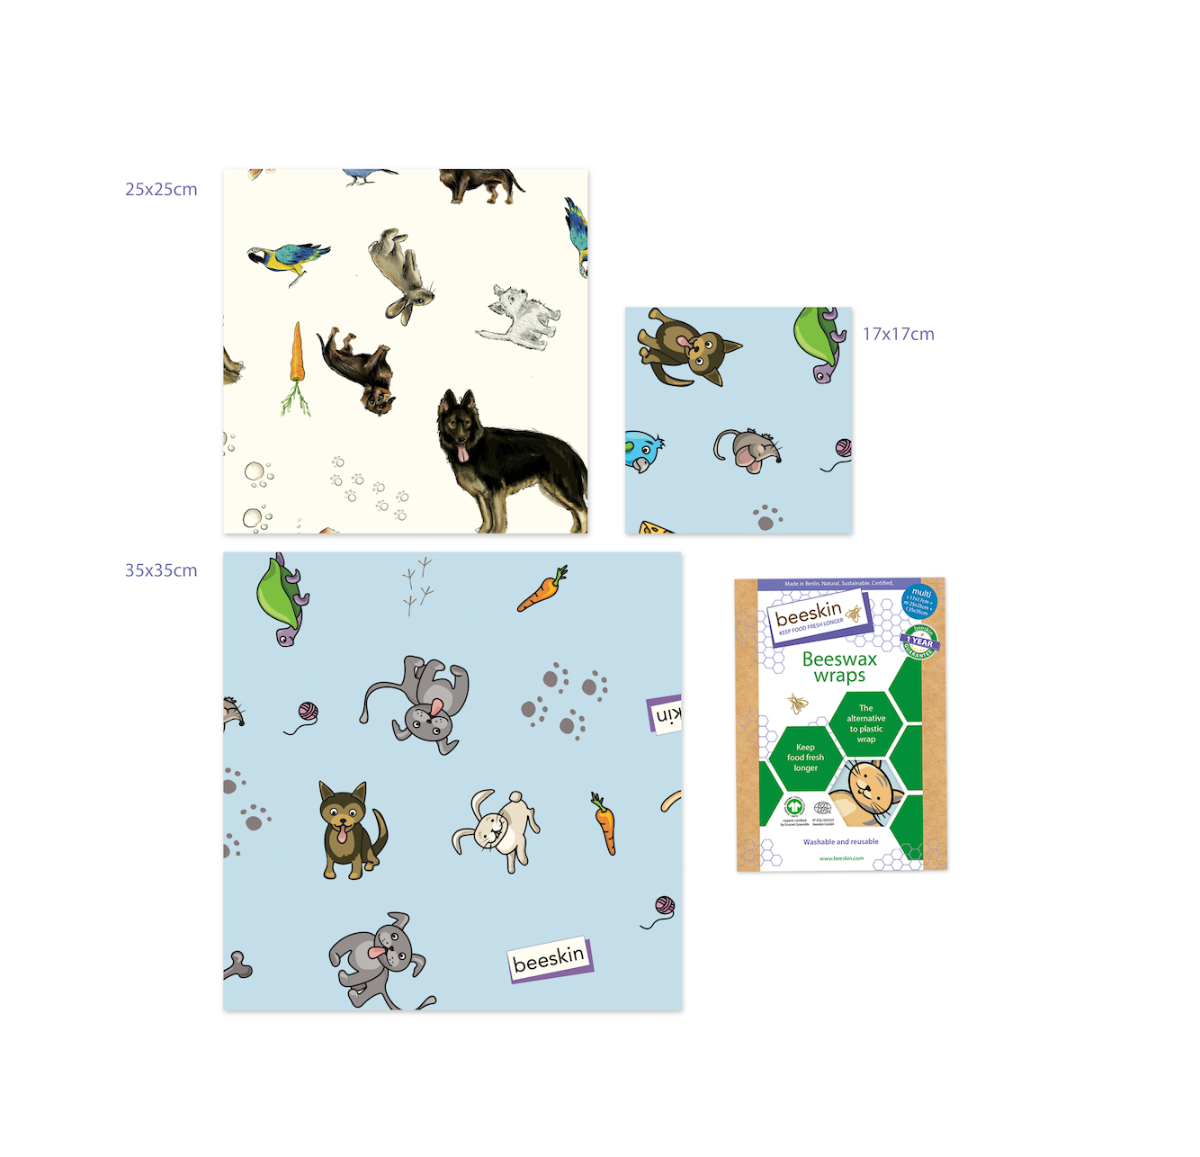 beeskin beeswax wrap multi pets Bruno natural and pets blue next to packaging